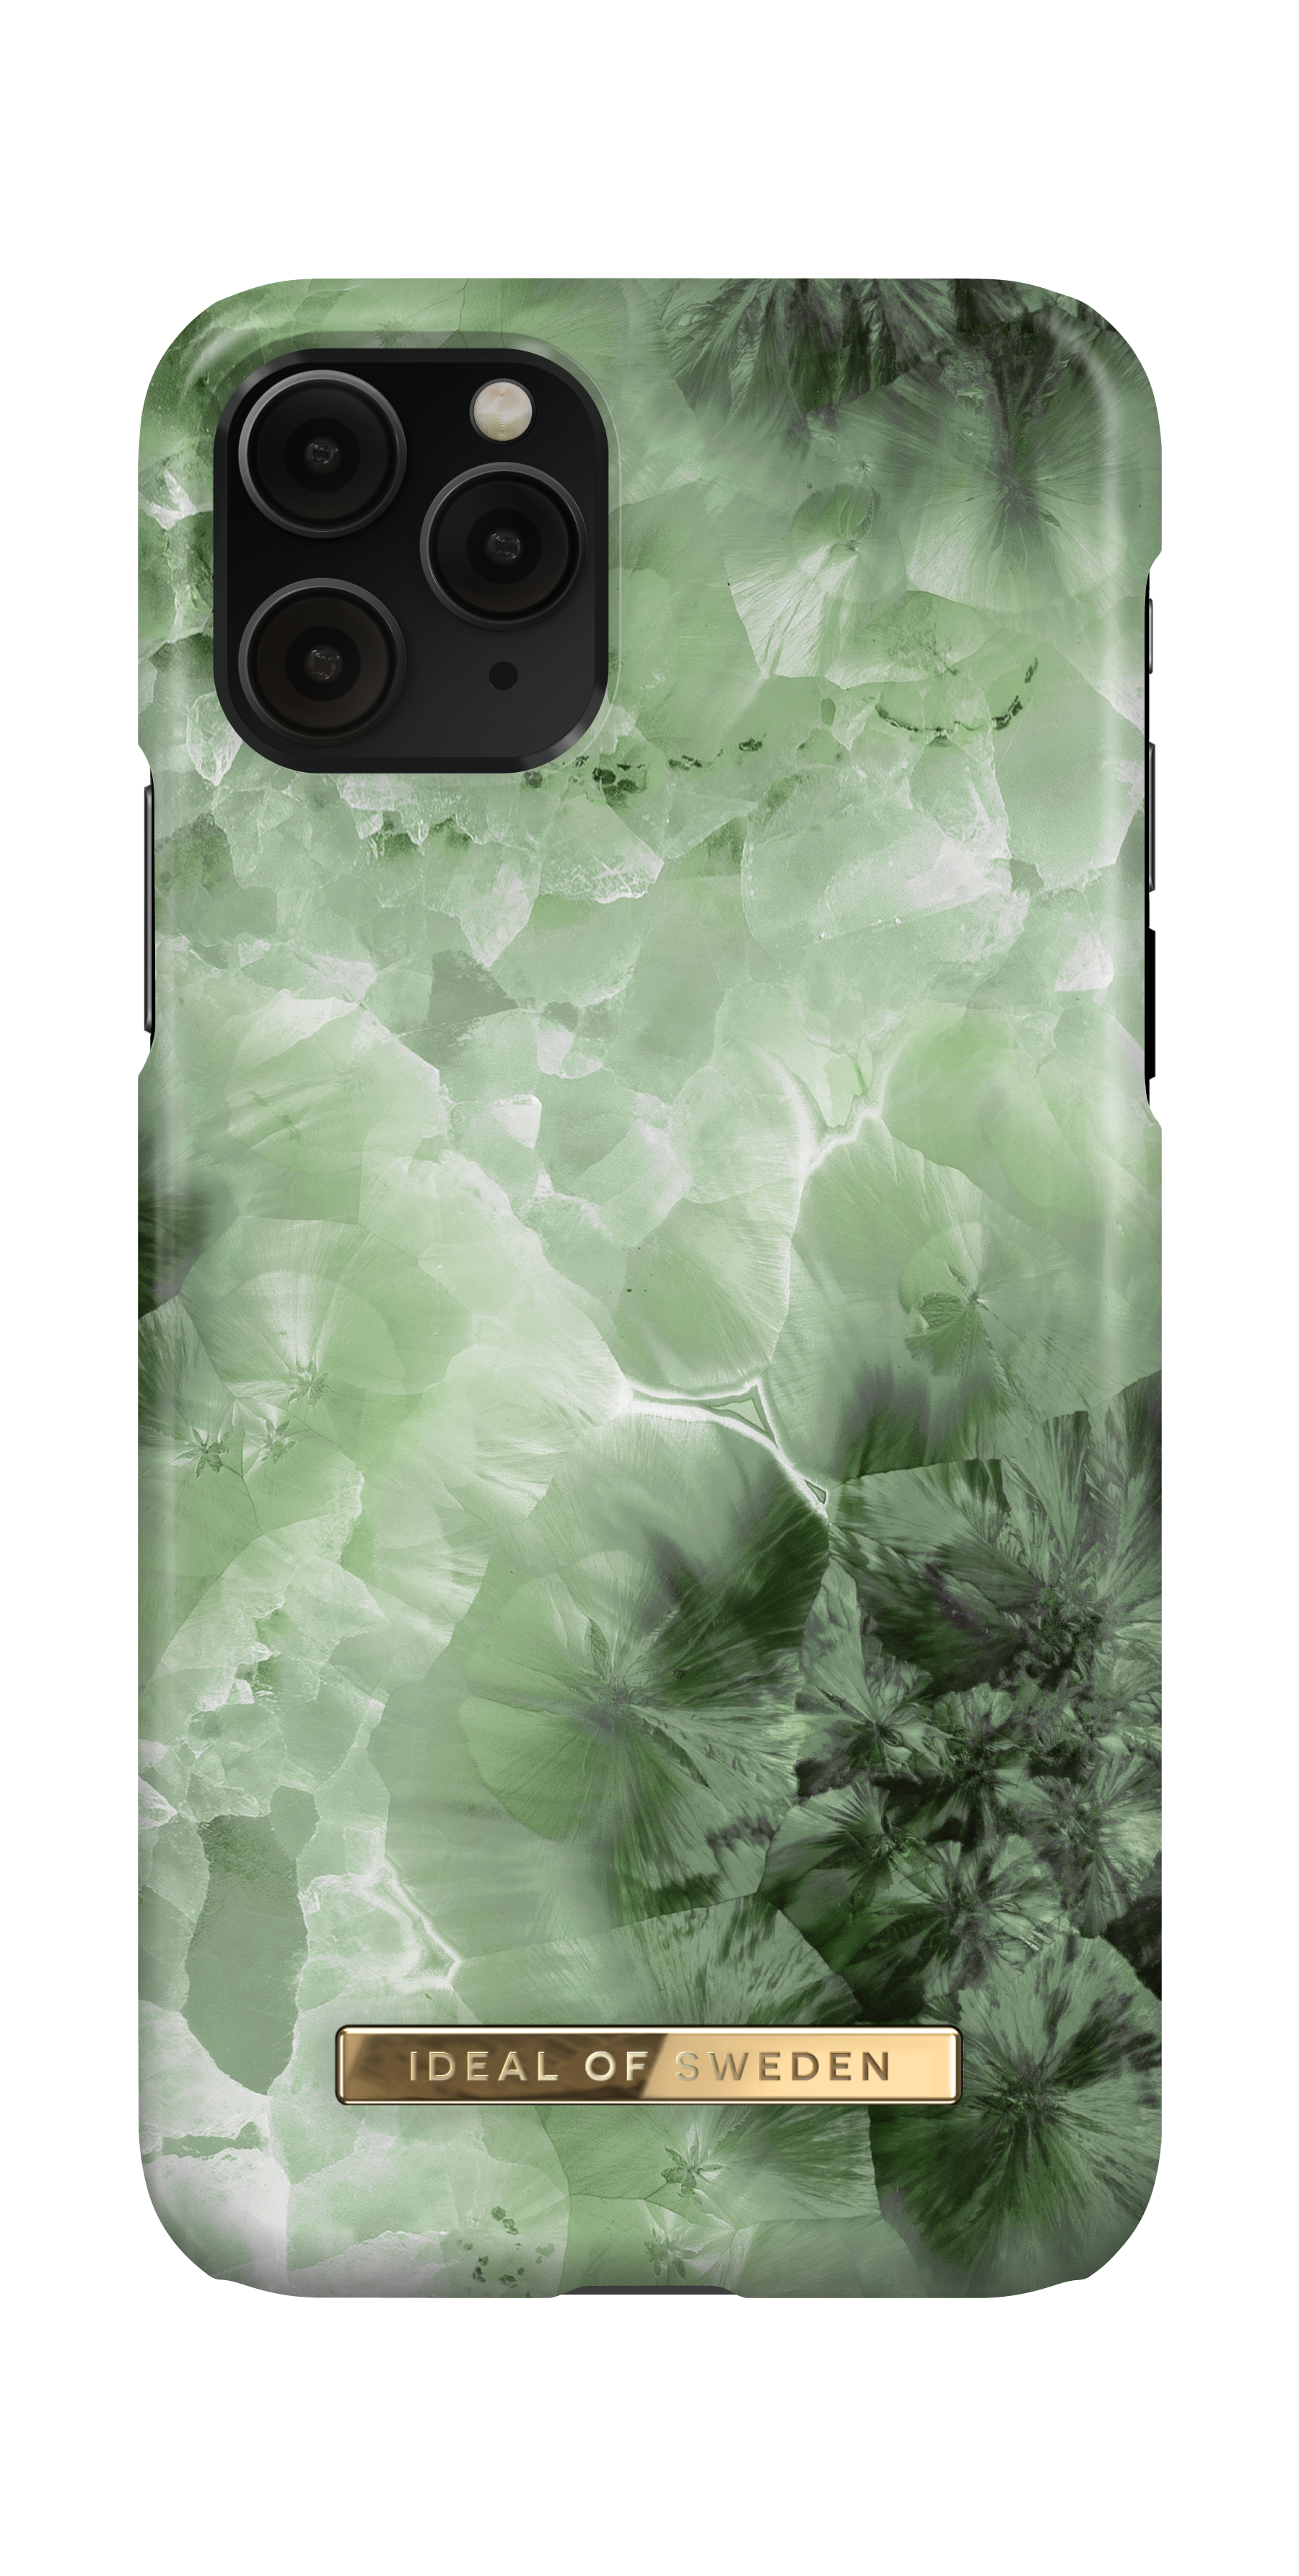 IDEAL OF iPhone 11 SWEDEN Backcover, Sky Green Apple, Pro, Crystal iPhone IDFCAW20-1958-230, X, iPhone XS